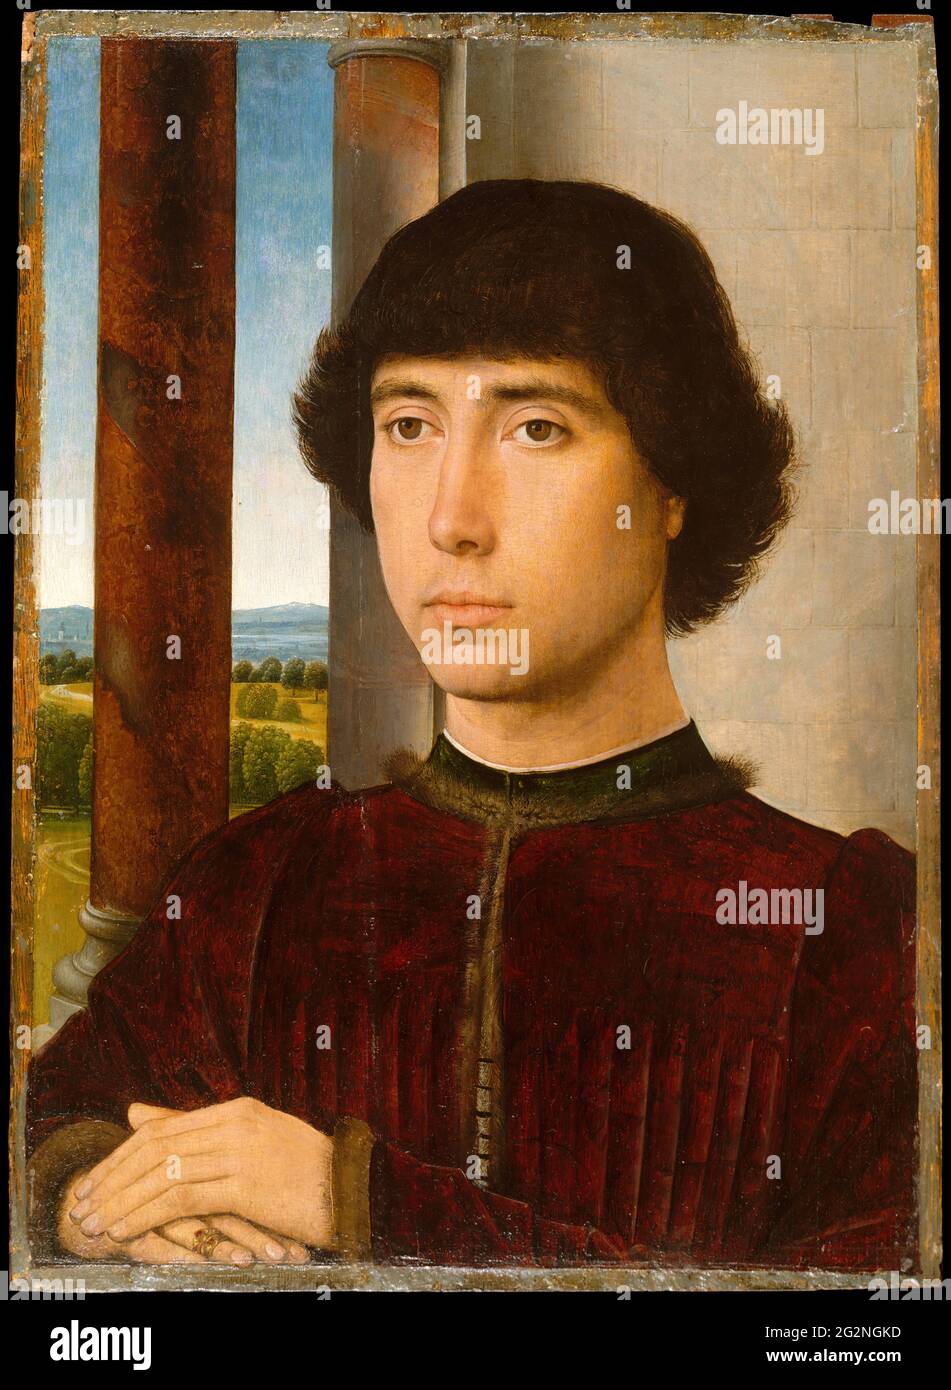 Hans Memling - Portrait of a Young Man Stock Photo - Alamy